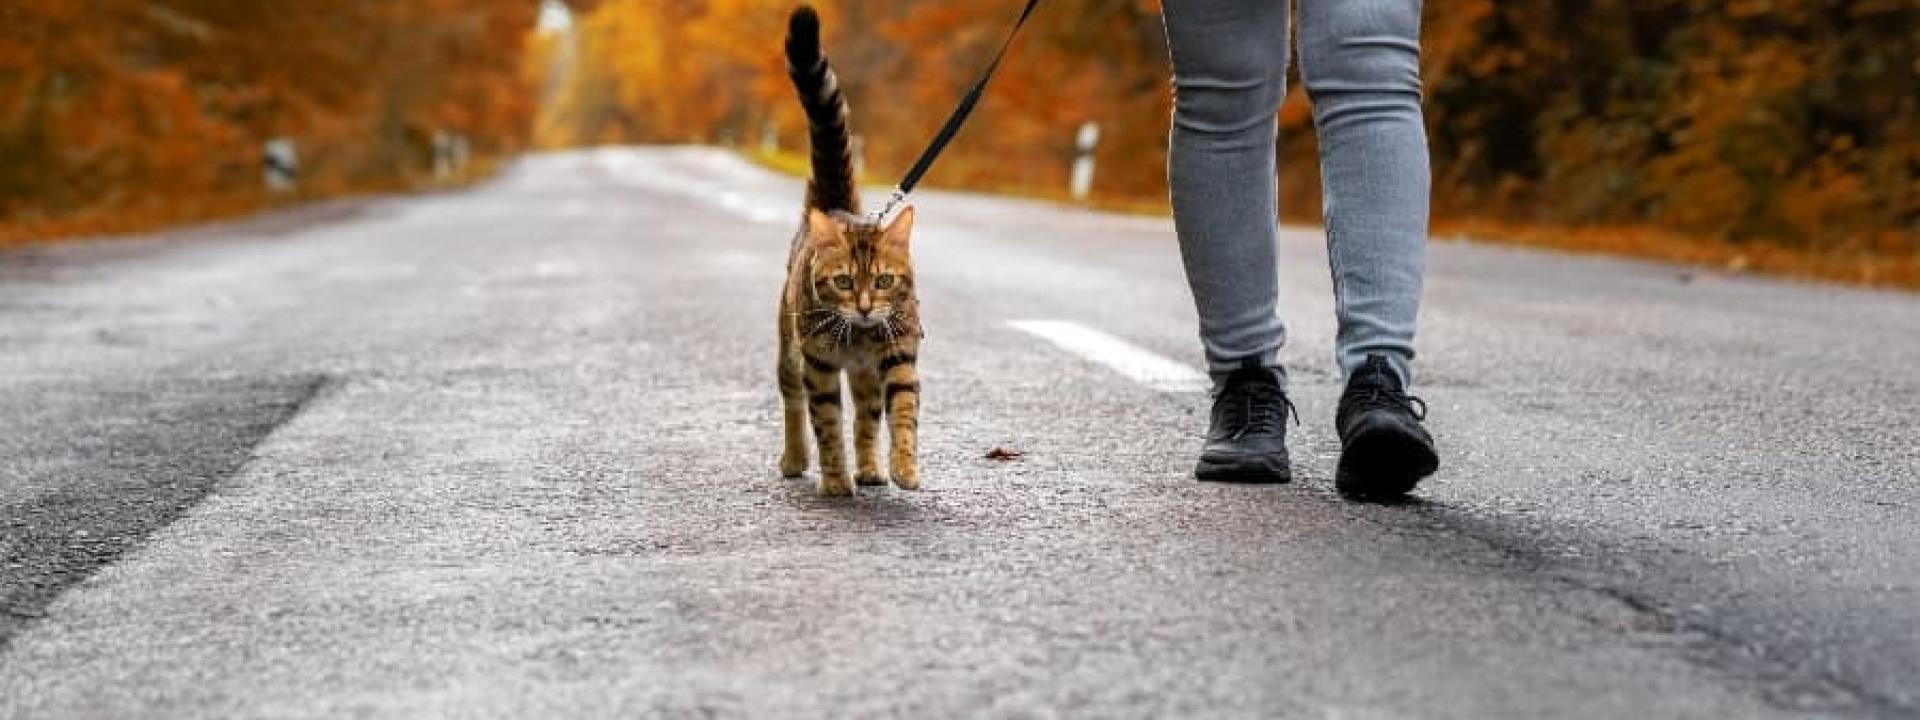 cat-going-for-a-walk-on-leash